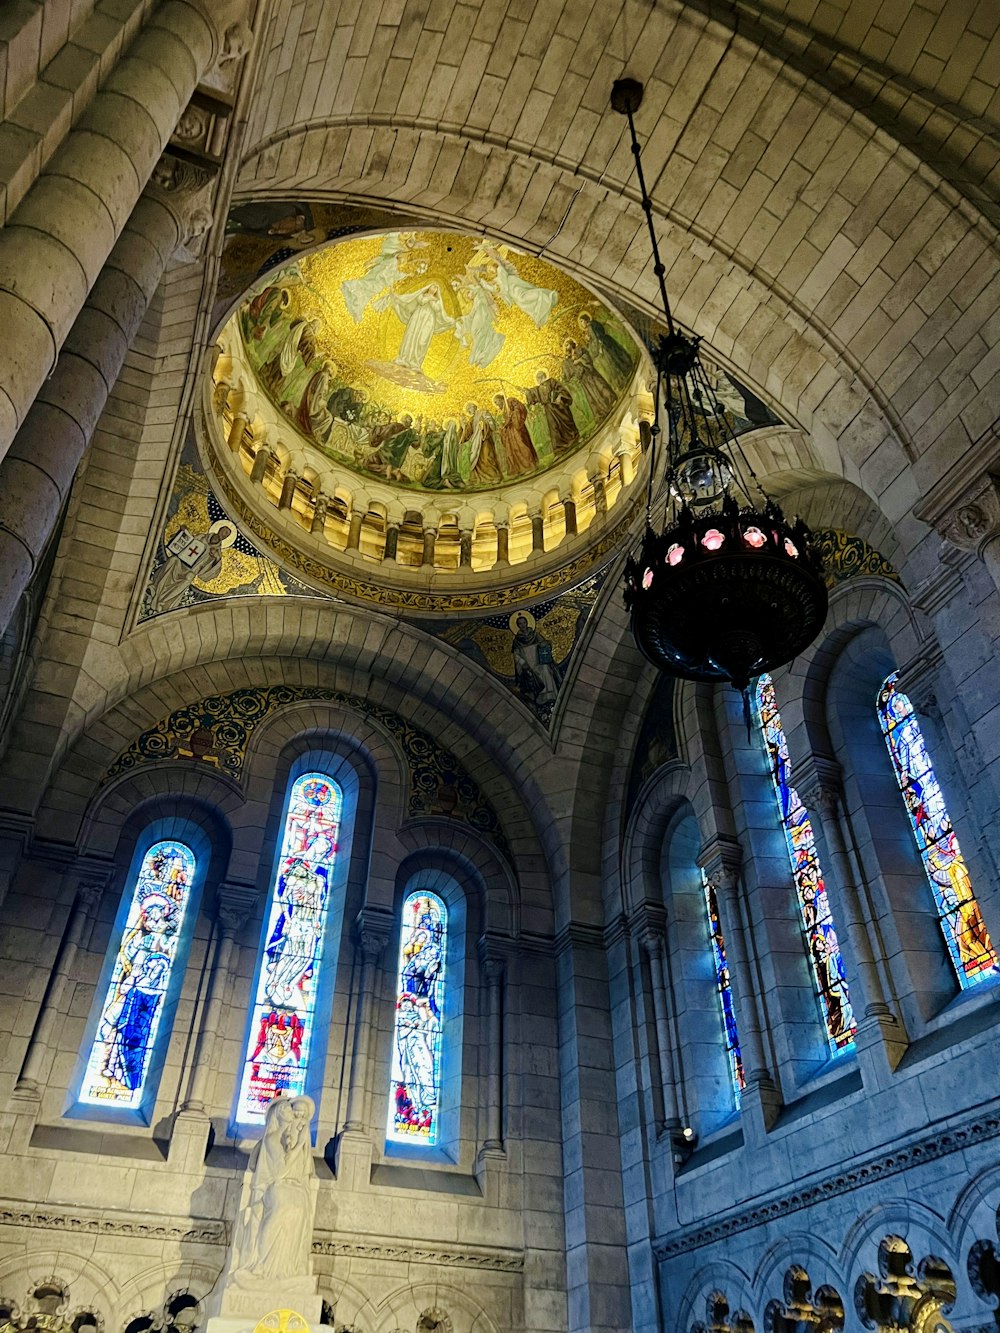 a church with stained glass windows and a chandelier